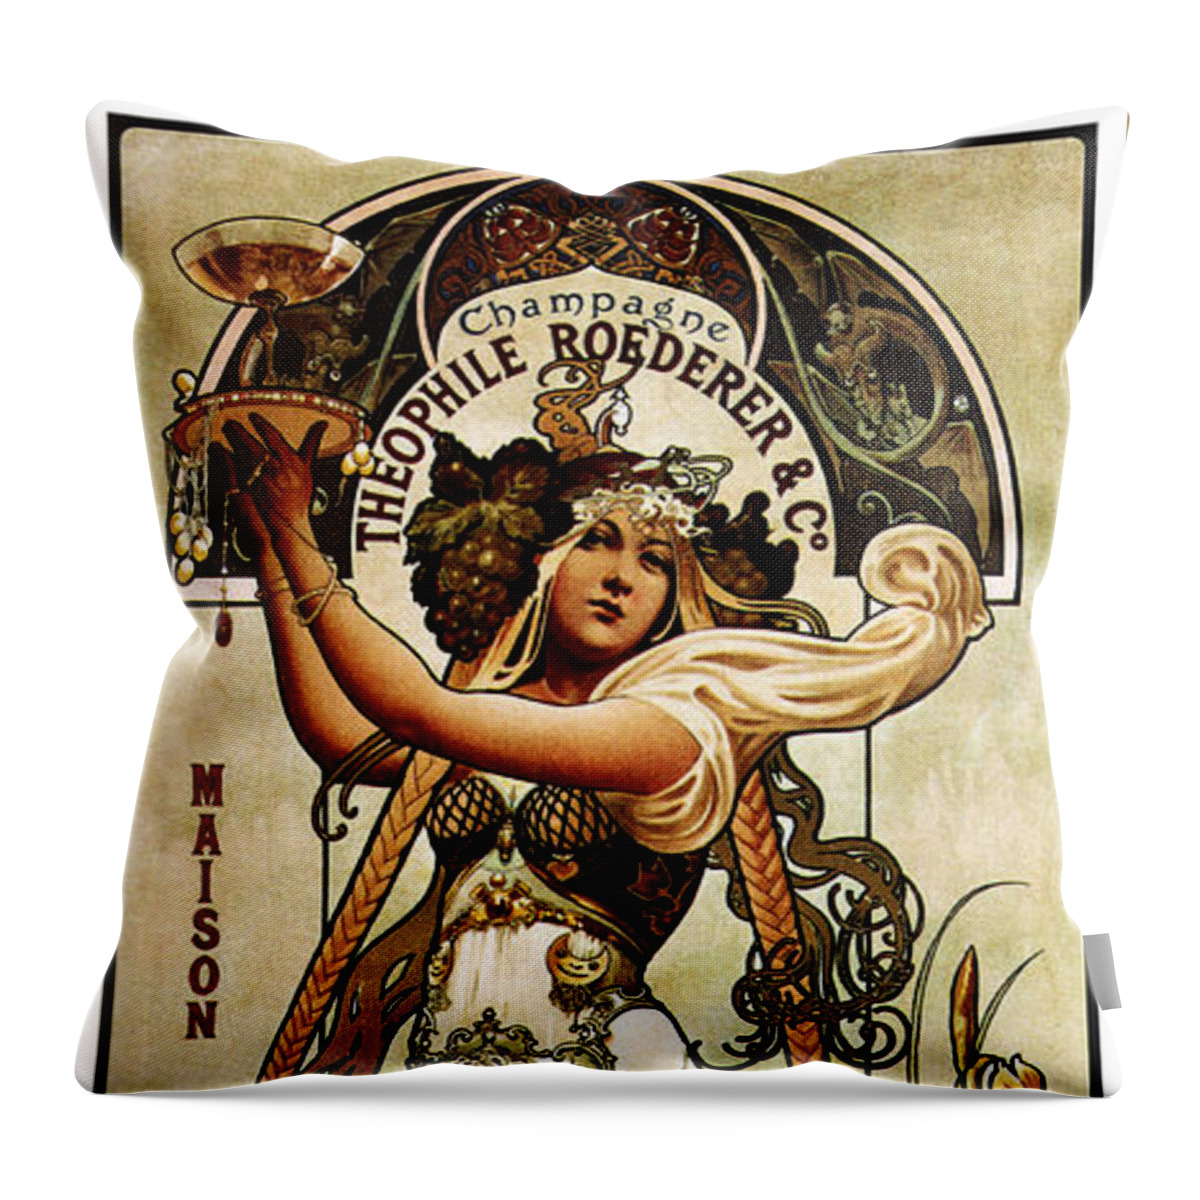 Theophile Roederer Throw Pillow featuring the mixed media Theophile Roederer - Champagne - Vintage Art Nouveau Advertising Poster by Studio Grafiikka